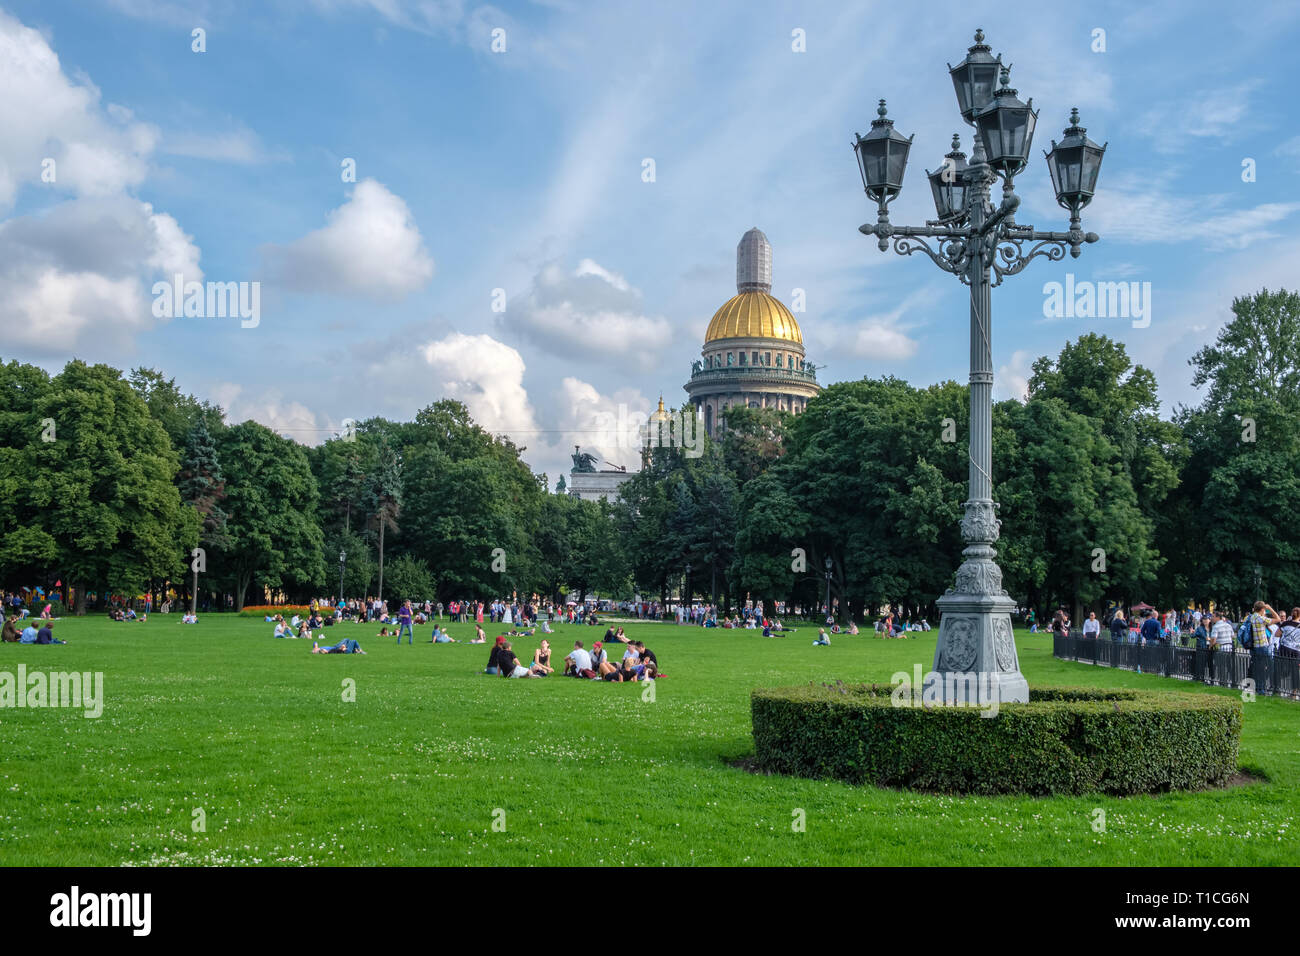 St. Petersburg, Russia, August 18, 2017 - City Park on the background of the Saint Isaac's  Cathedral (Isaakievskiy Sobor). Stock Photo